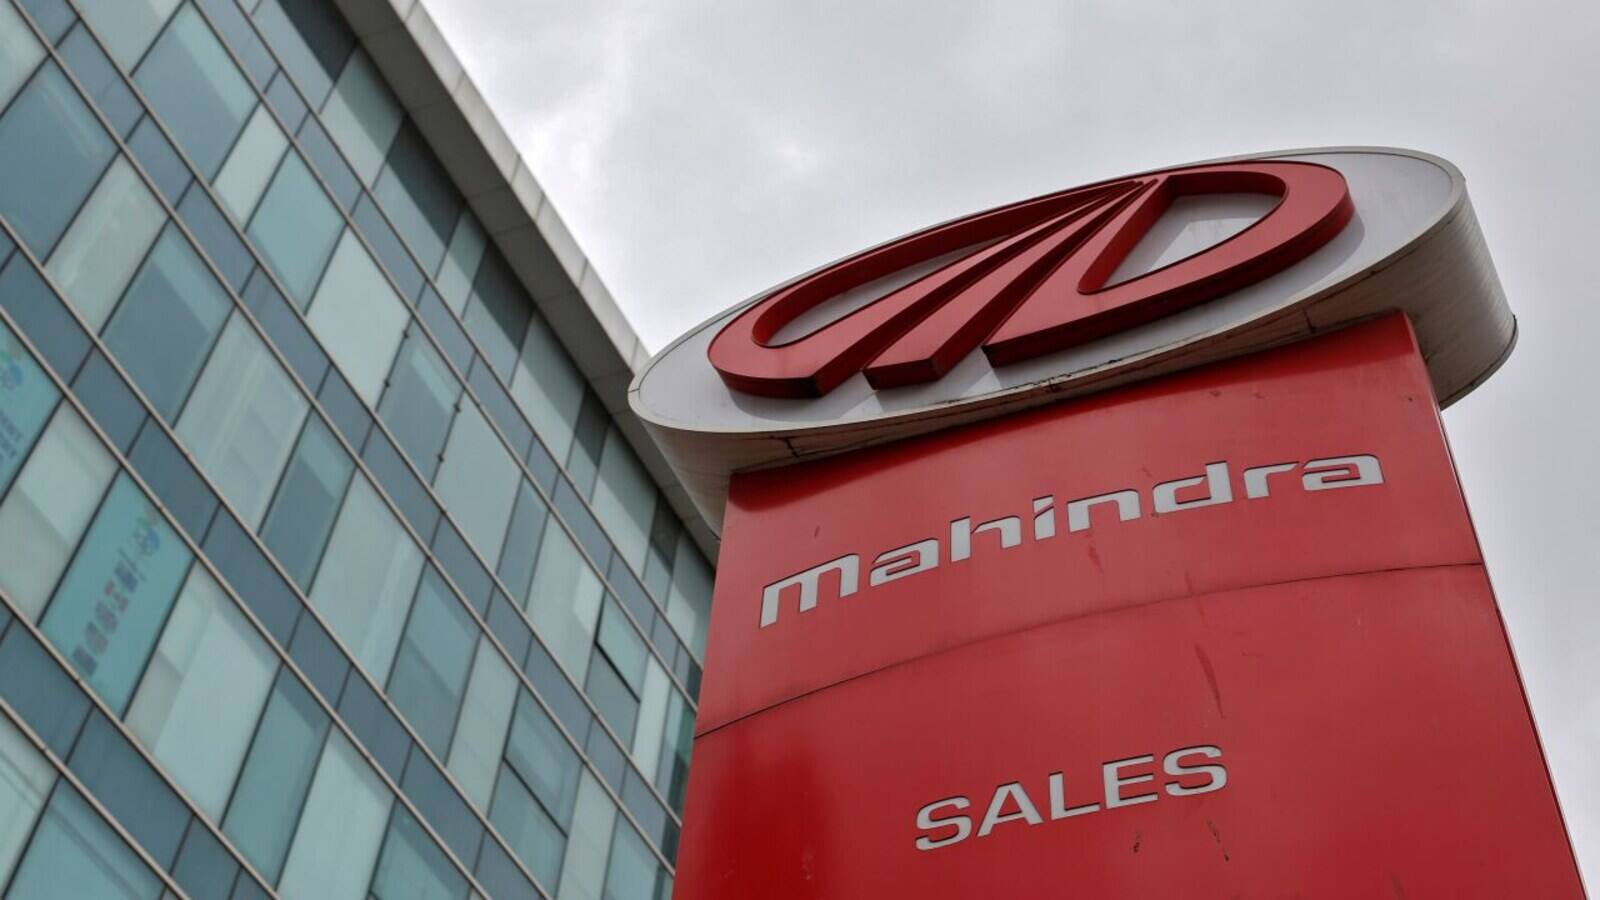 No immediate plan for auto business demerger, says Mahindra CEO Shah